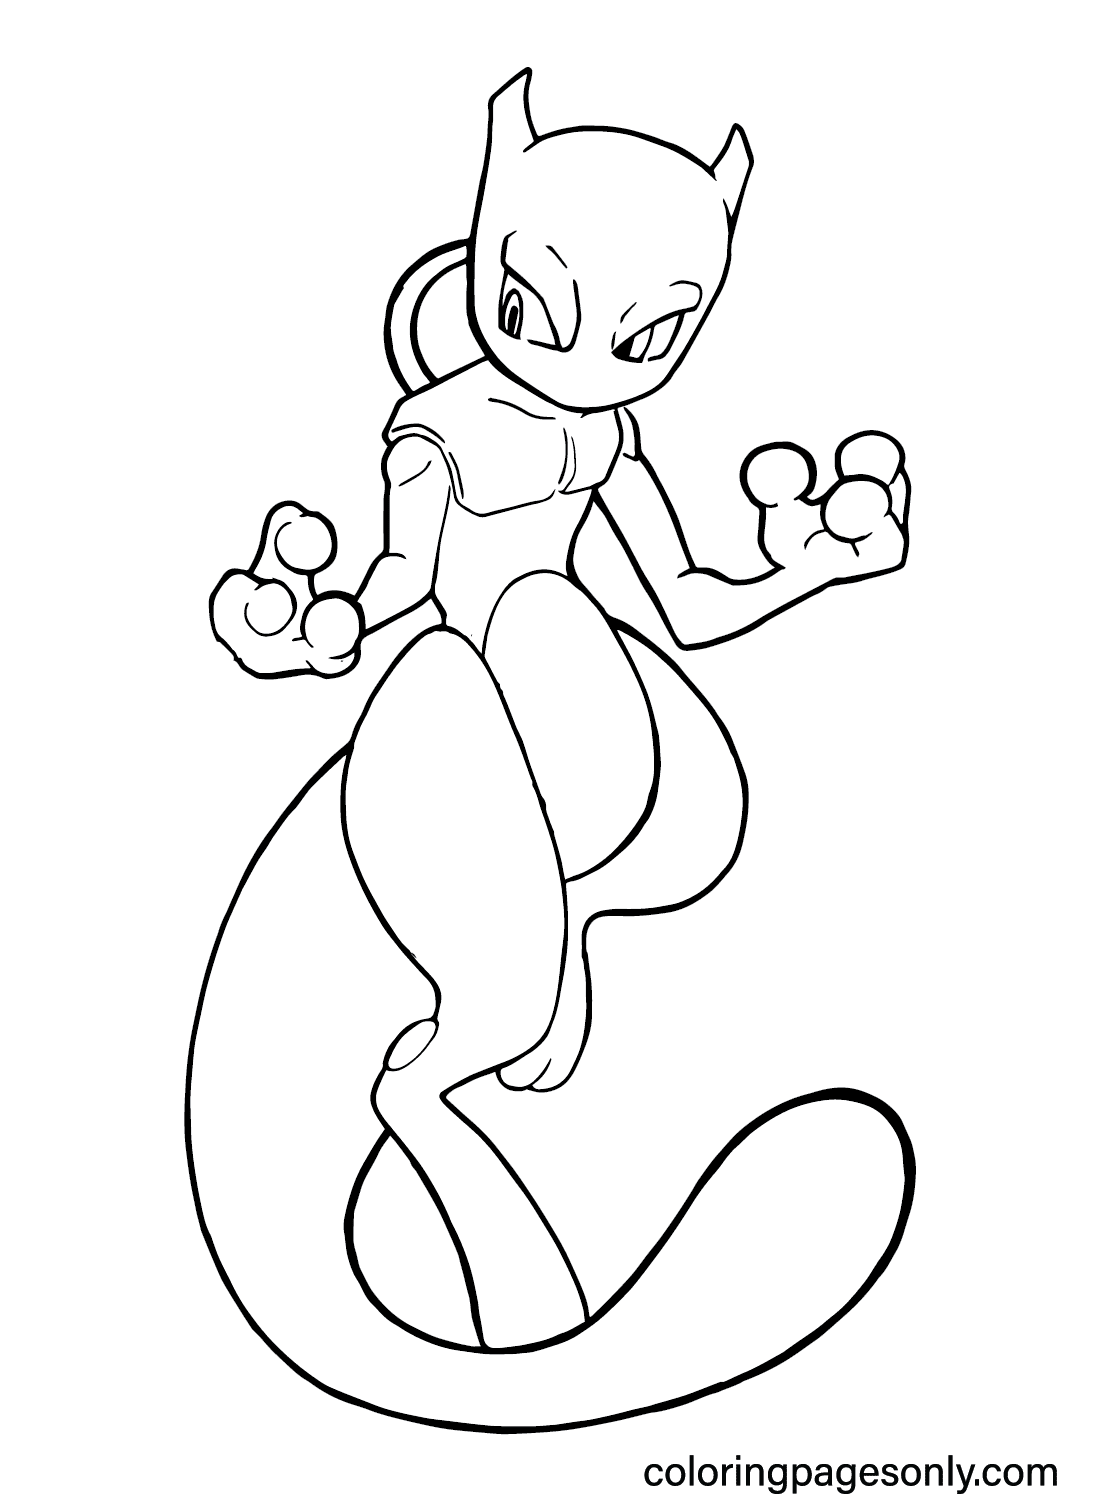 Free Mewtwo Coloring Page from Mewtwo